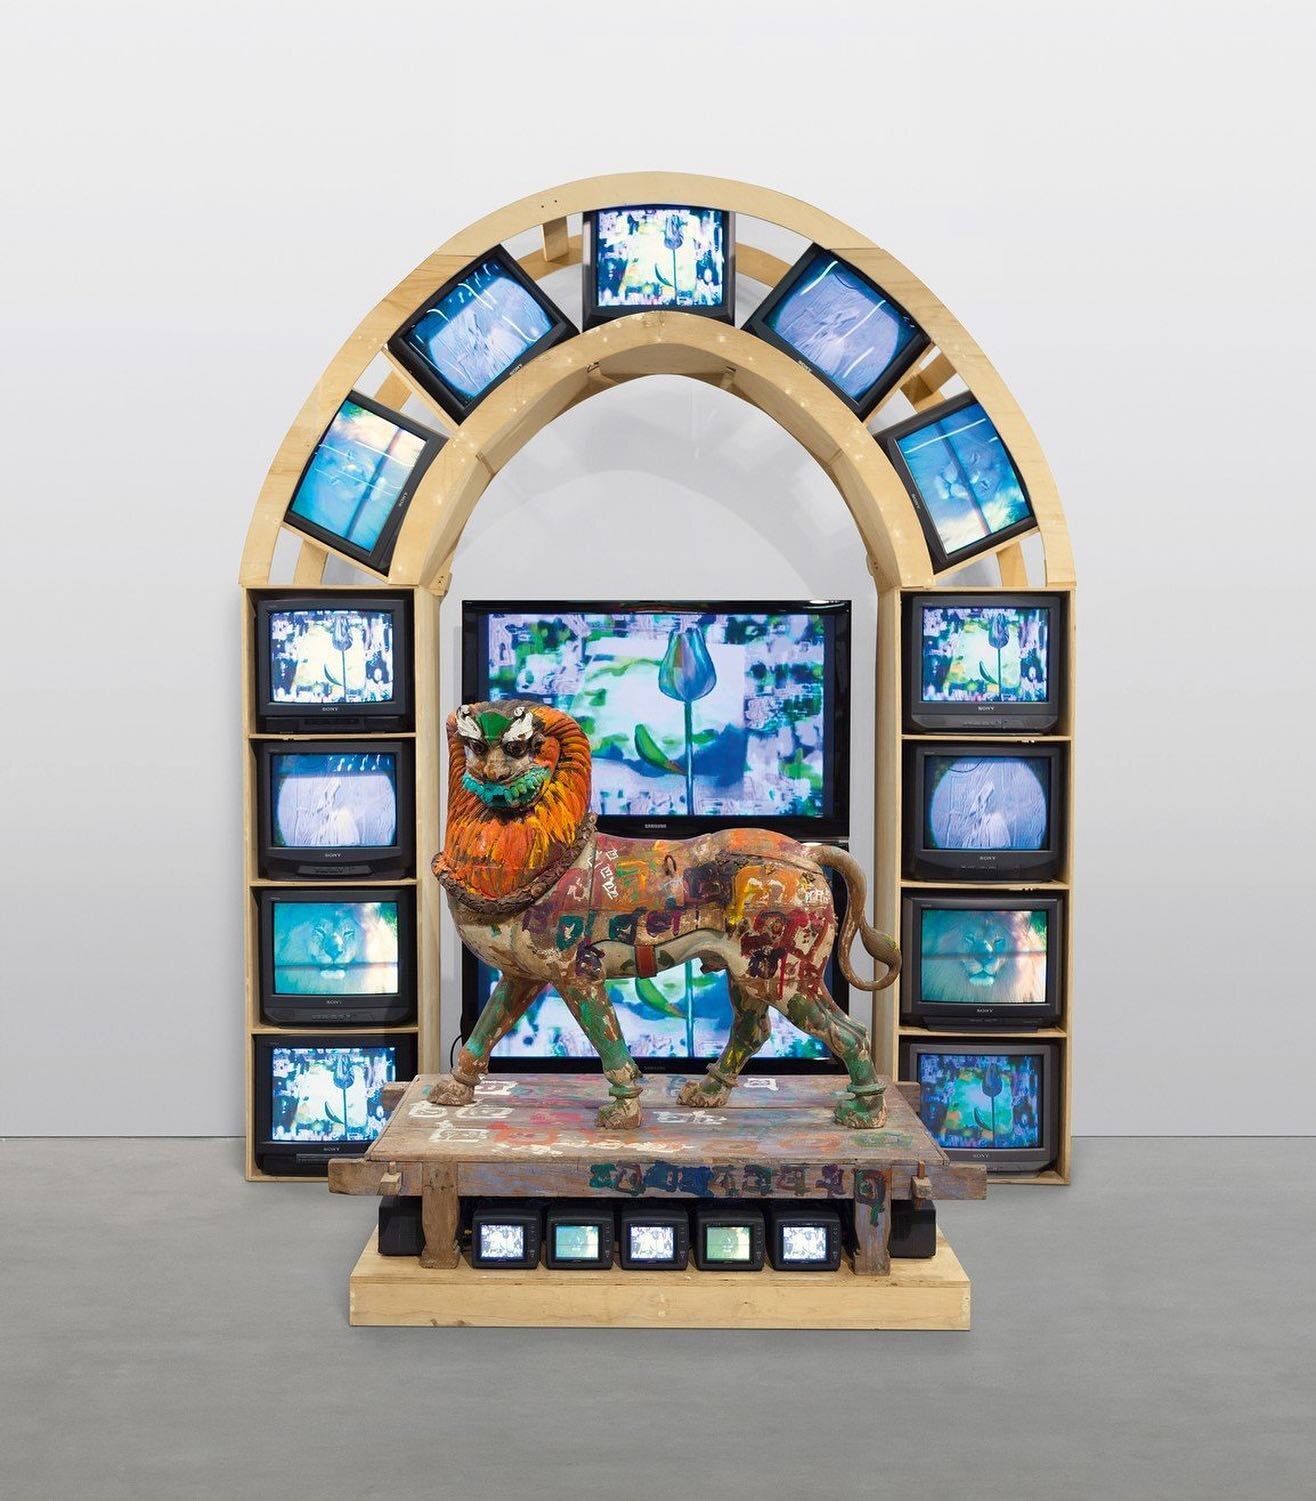 Nam June Paik&rsquo;s solo exhibition
is on view @gagosian gallery

Melding an early training in classical music and subsequent interest in musical composition with radical, collaborative approaches to aesthetics and performance, Paik produced multim